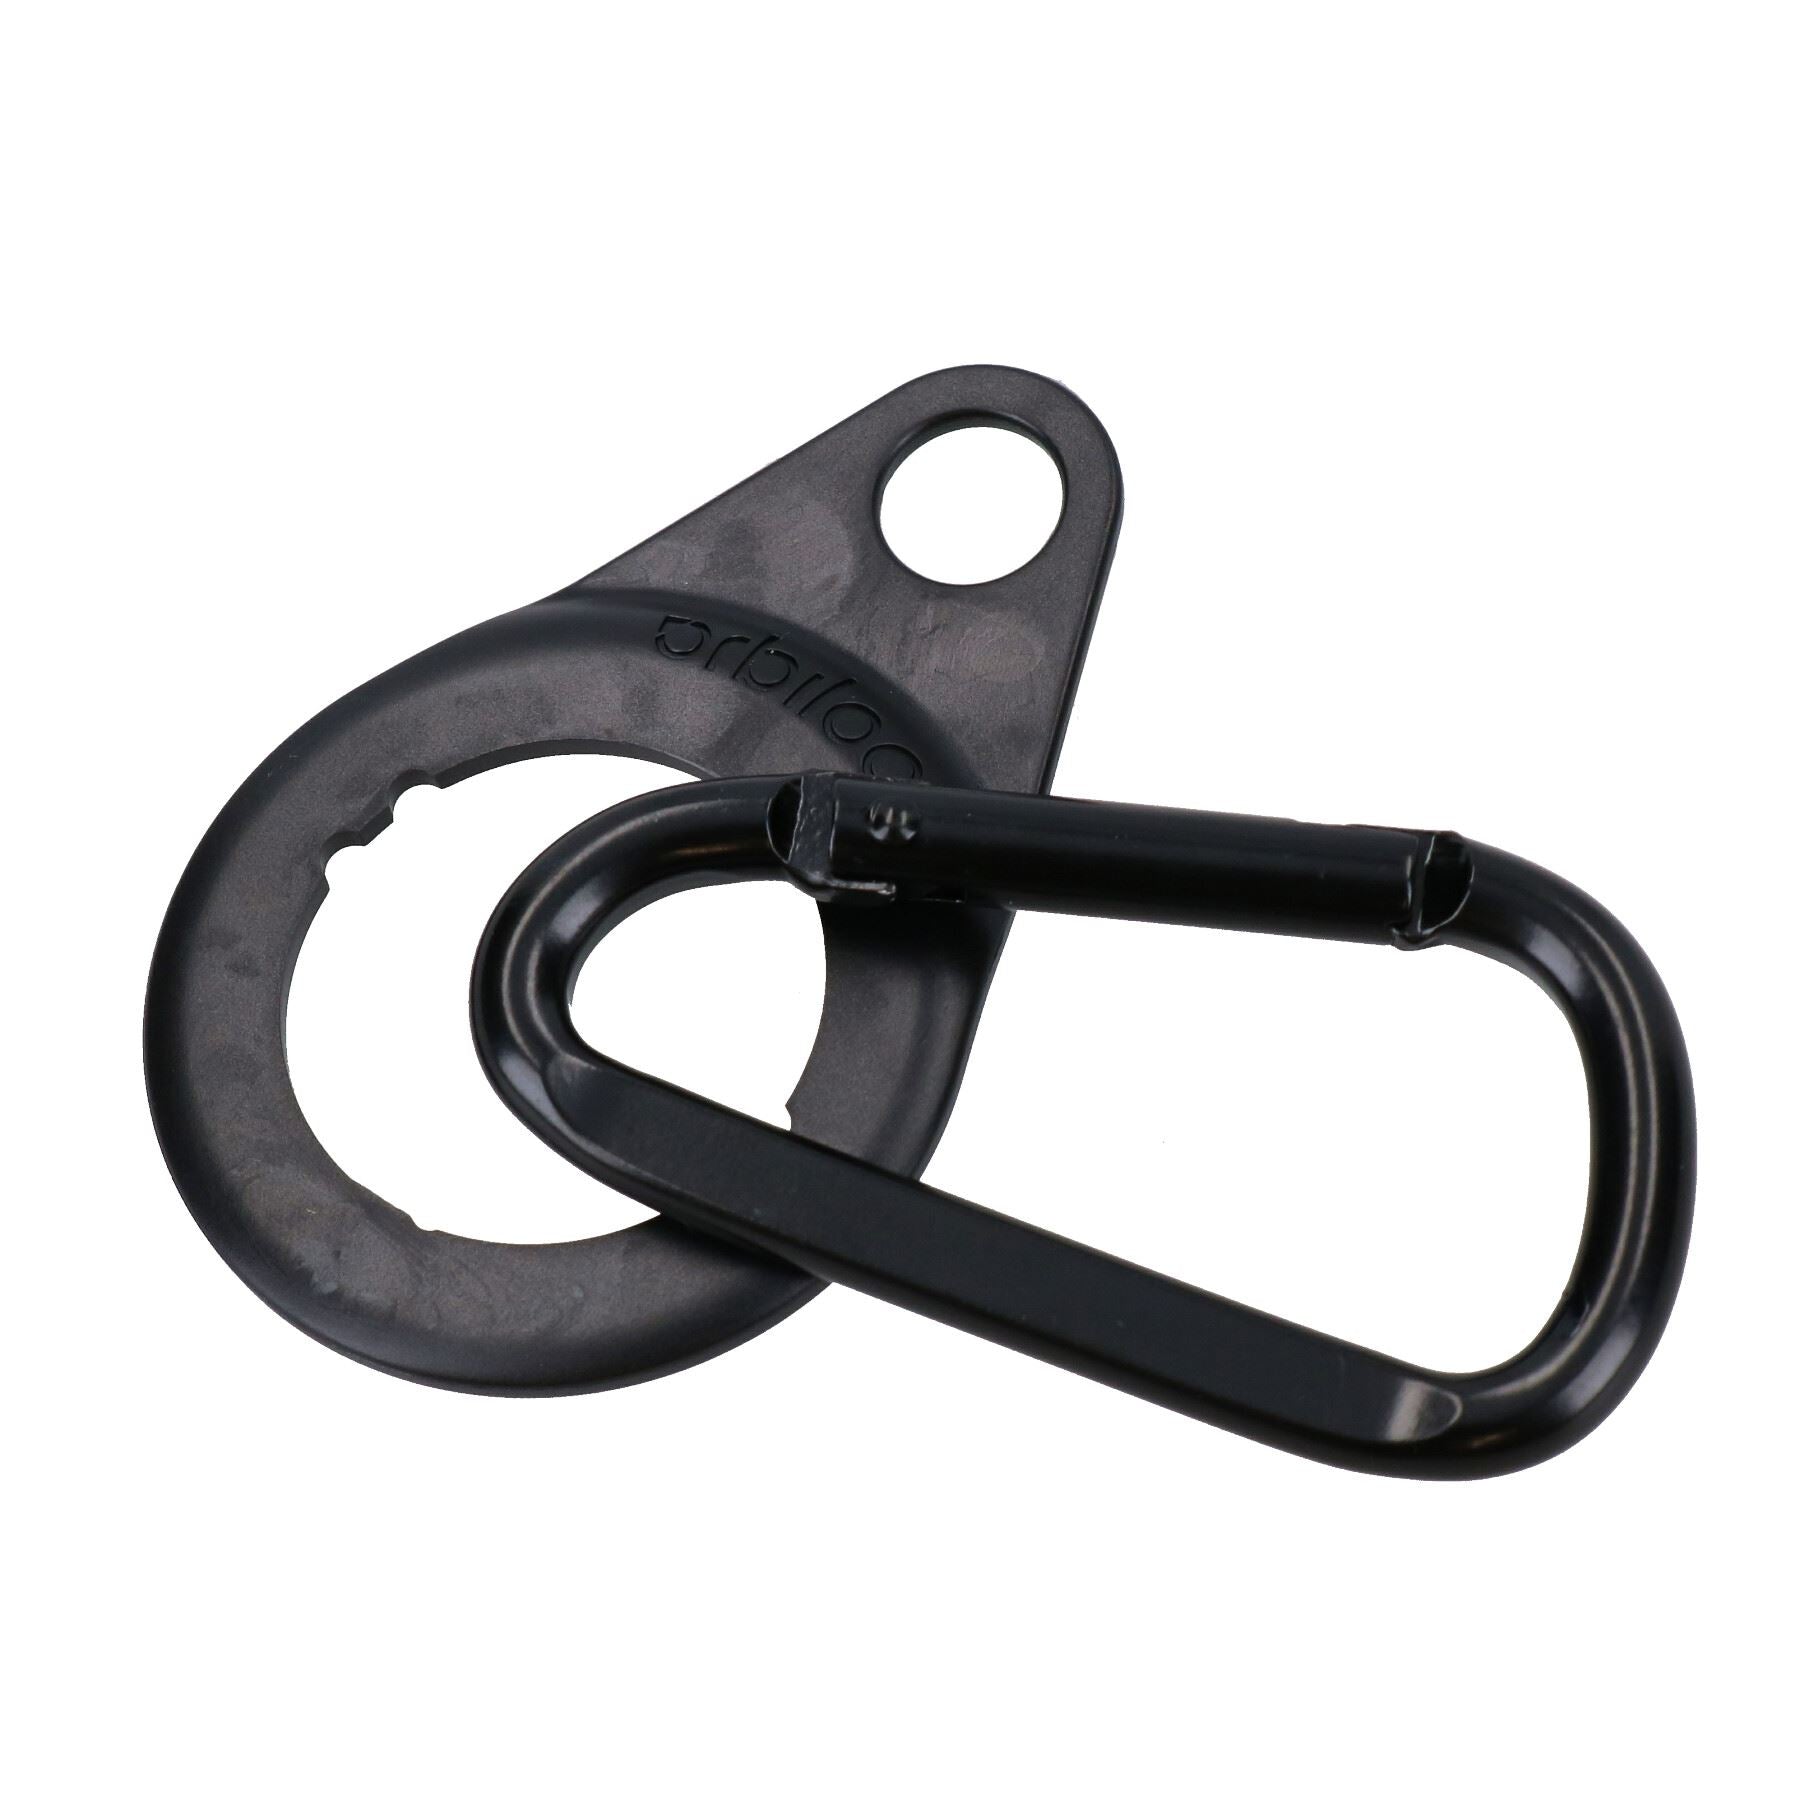 Orbiloc Carabiner for Dual Flashing/Solid Safety LED Light for Dogs